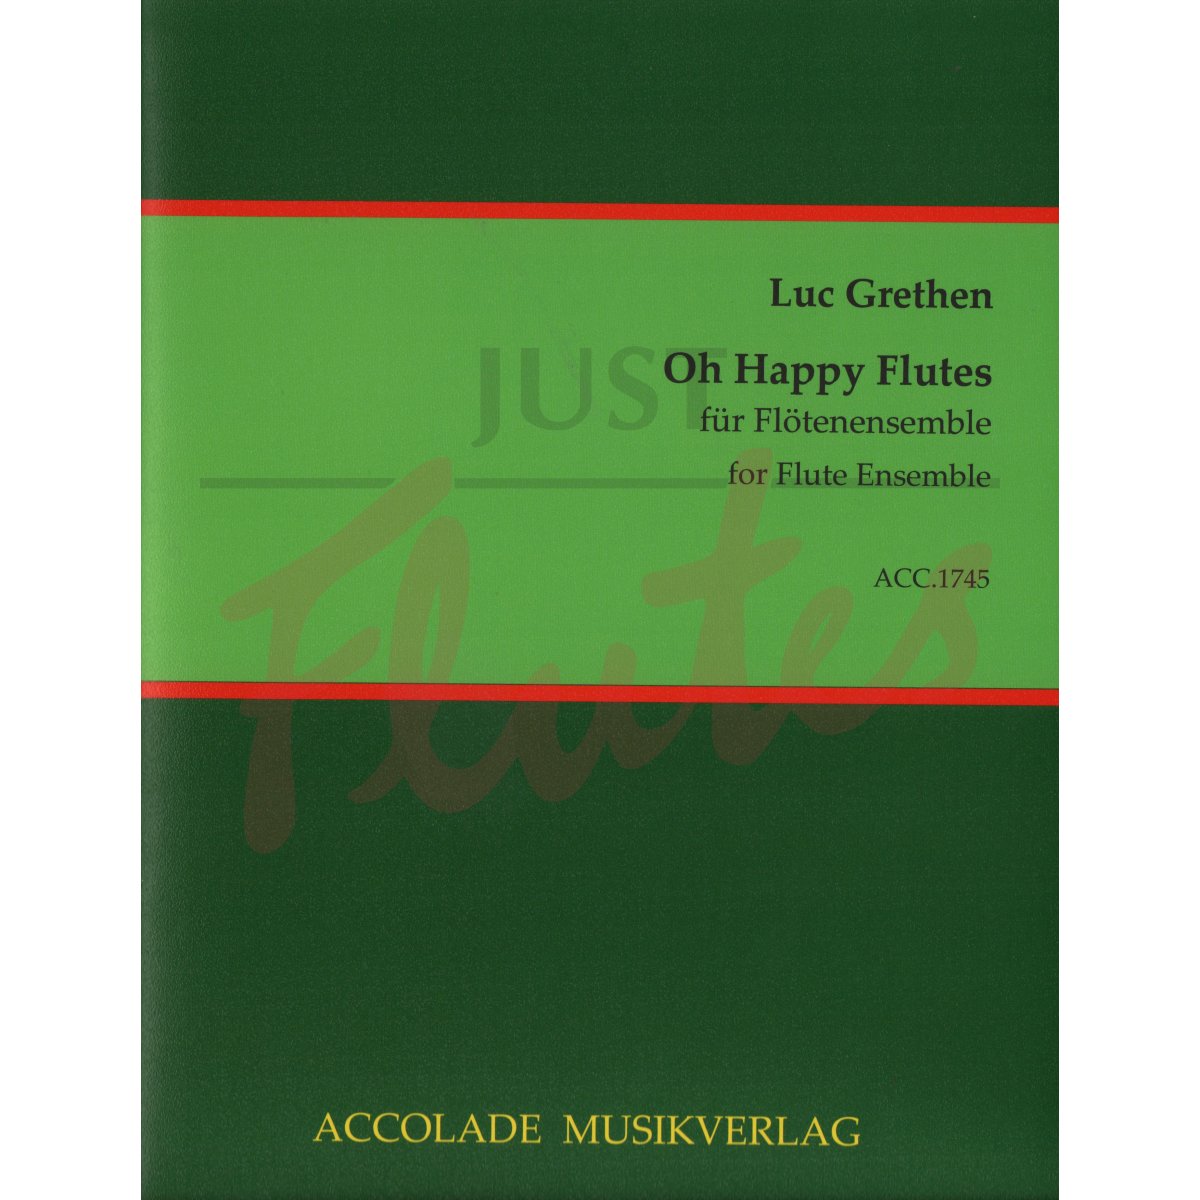 Oh Happy Flutes for Solo Flutes, Flute Ensemble and Piano